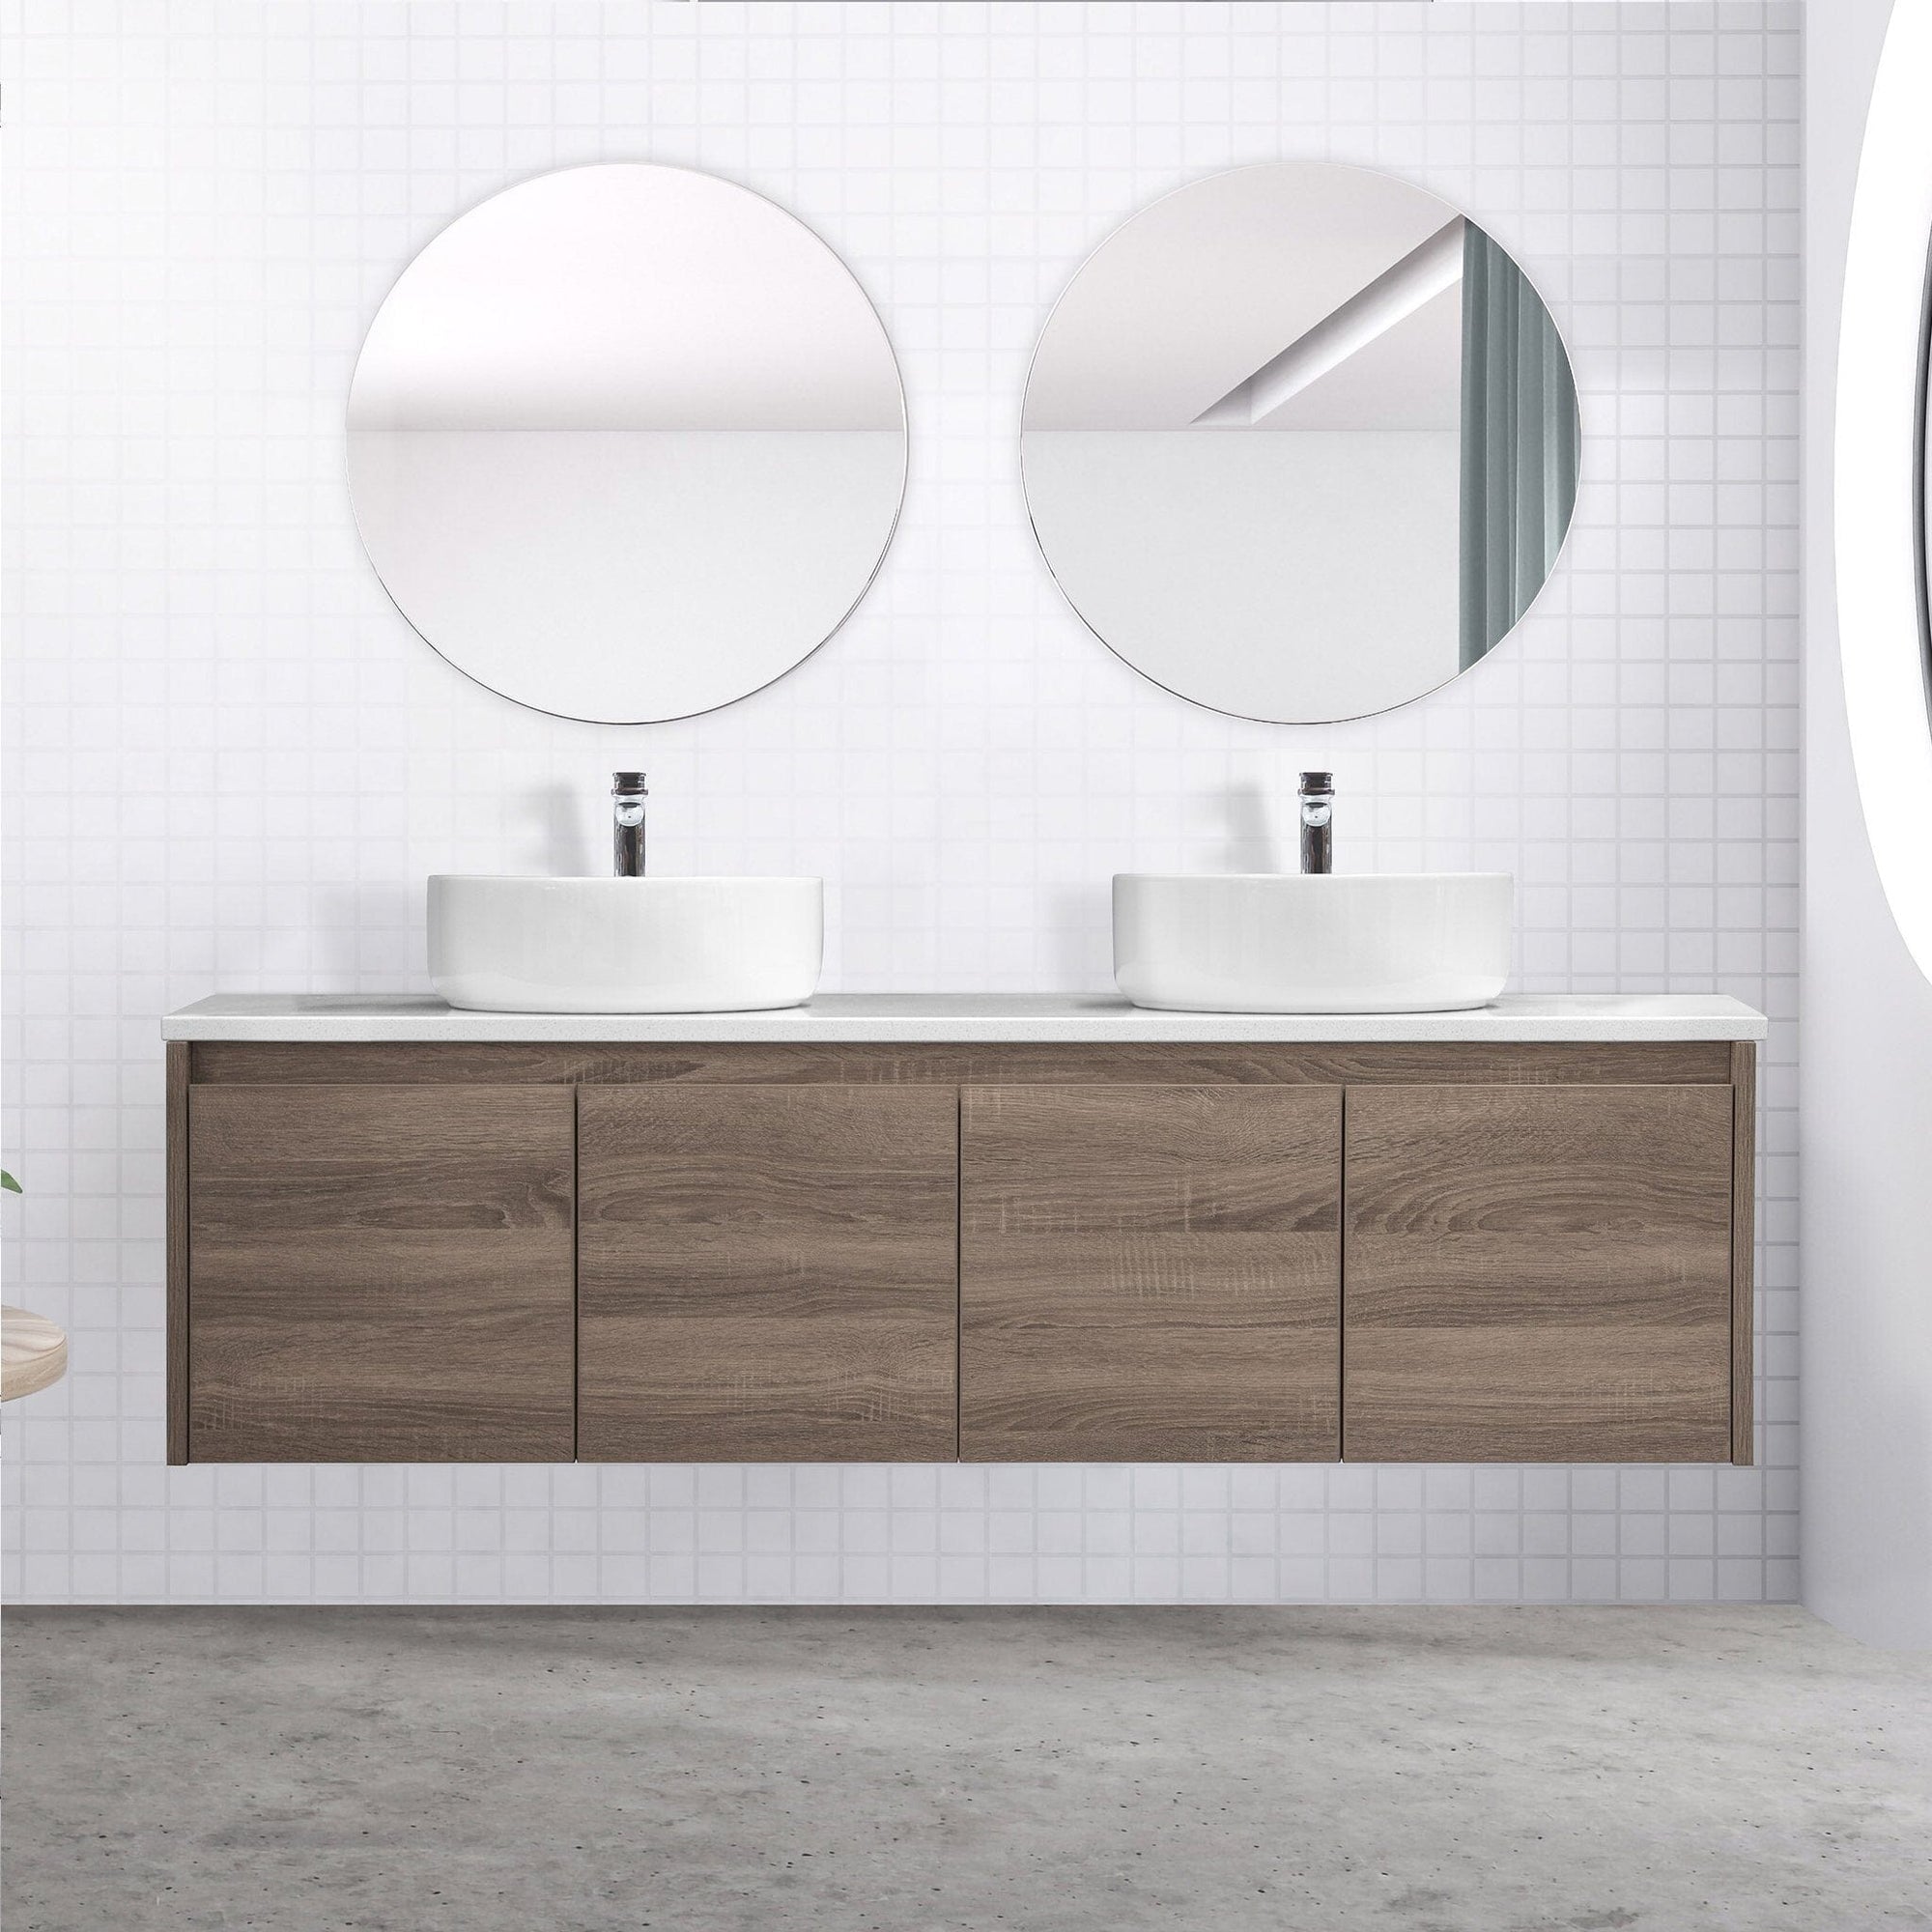 Amber 1500mm Wall Hung Vanity Unit with Double Basin Vanities & Mirrors Arova 